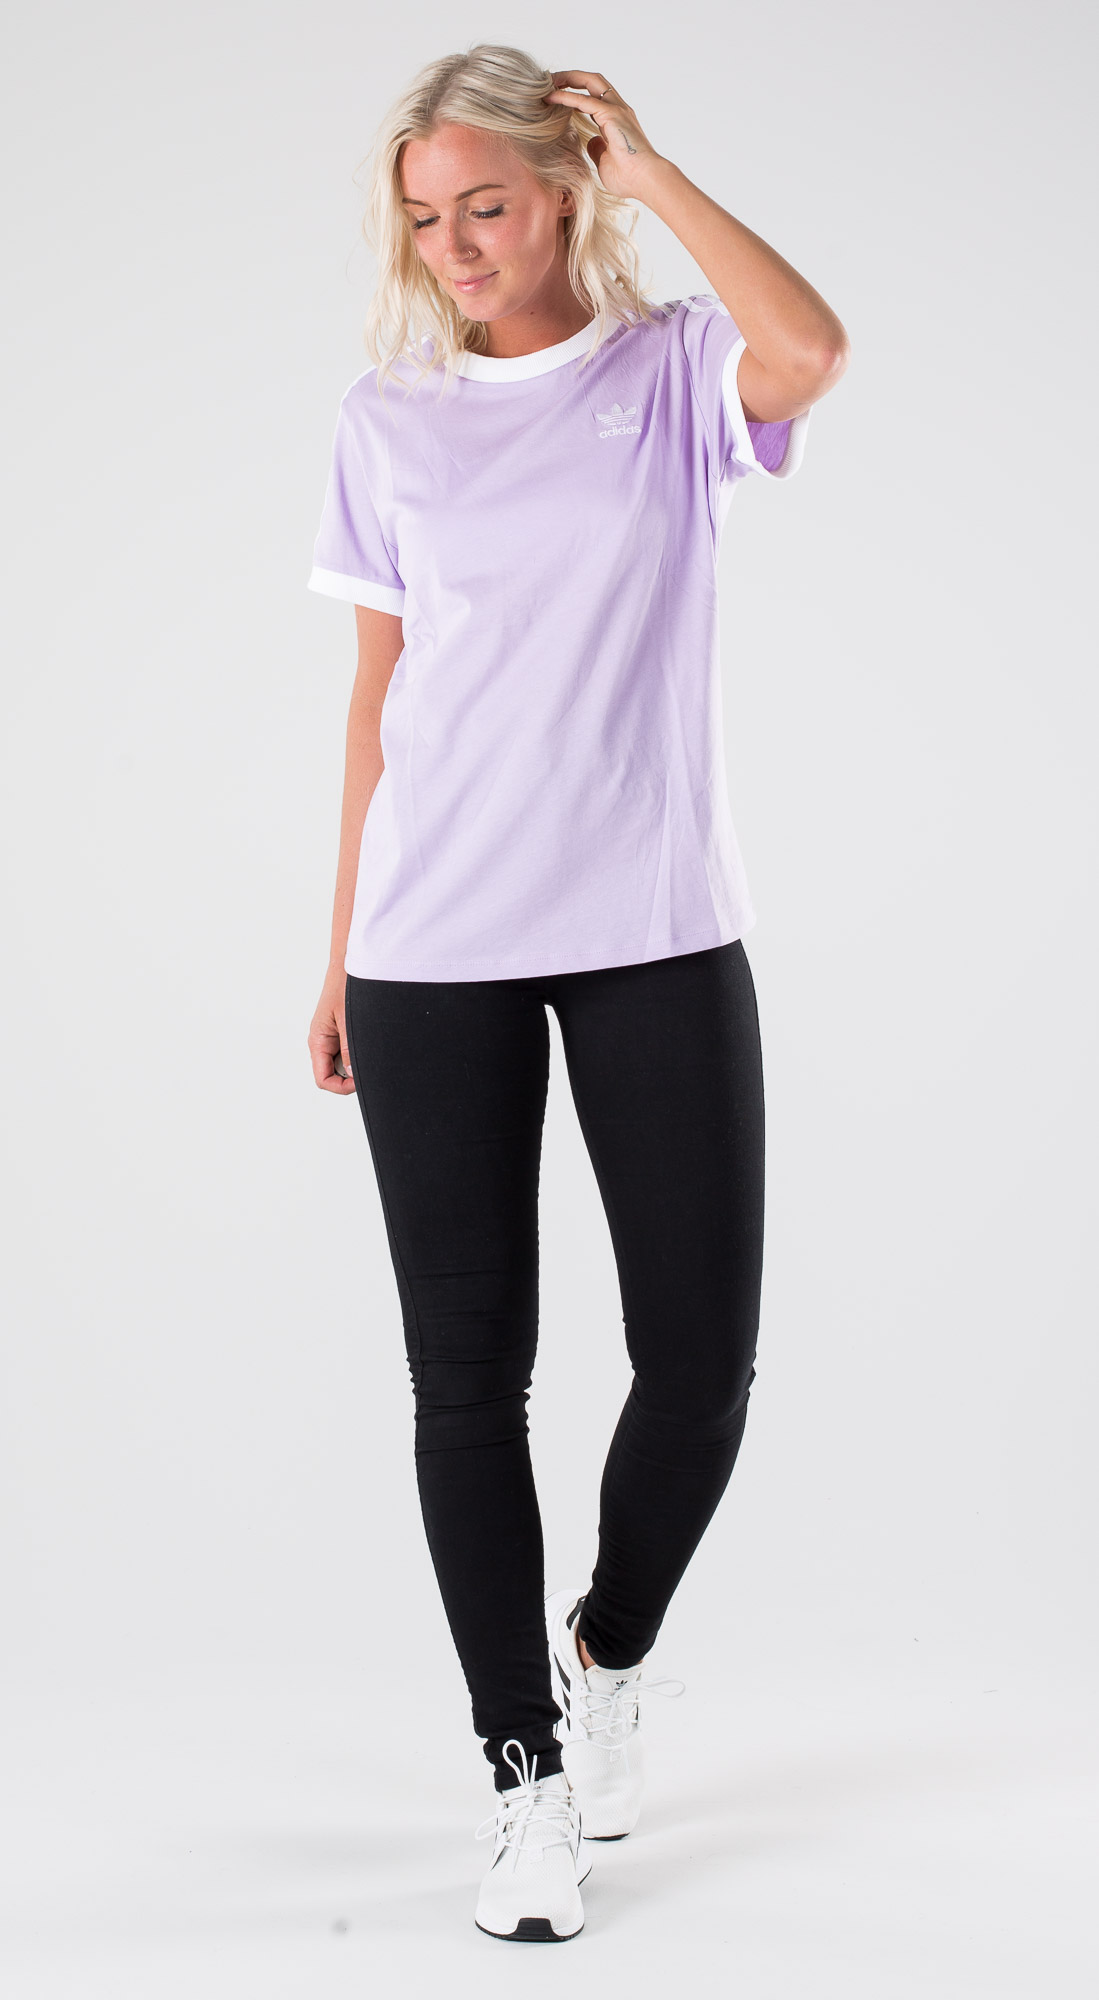 adidas purple outfit